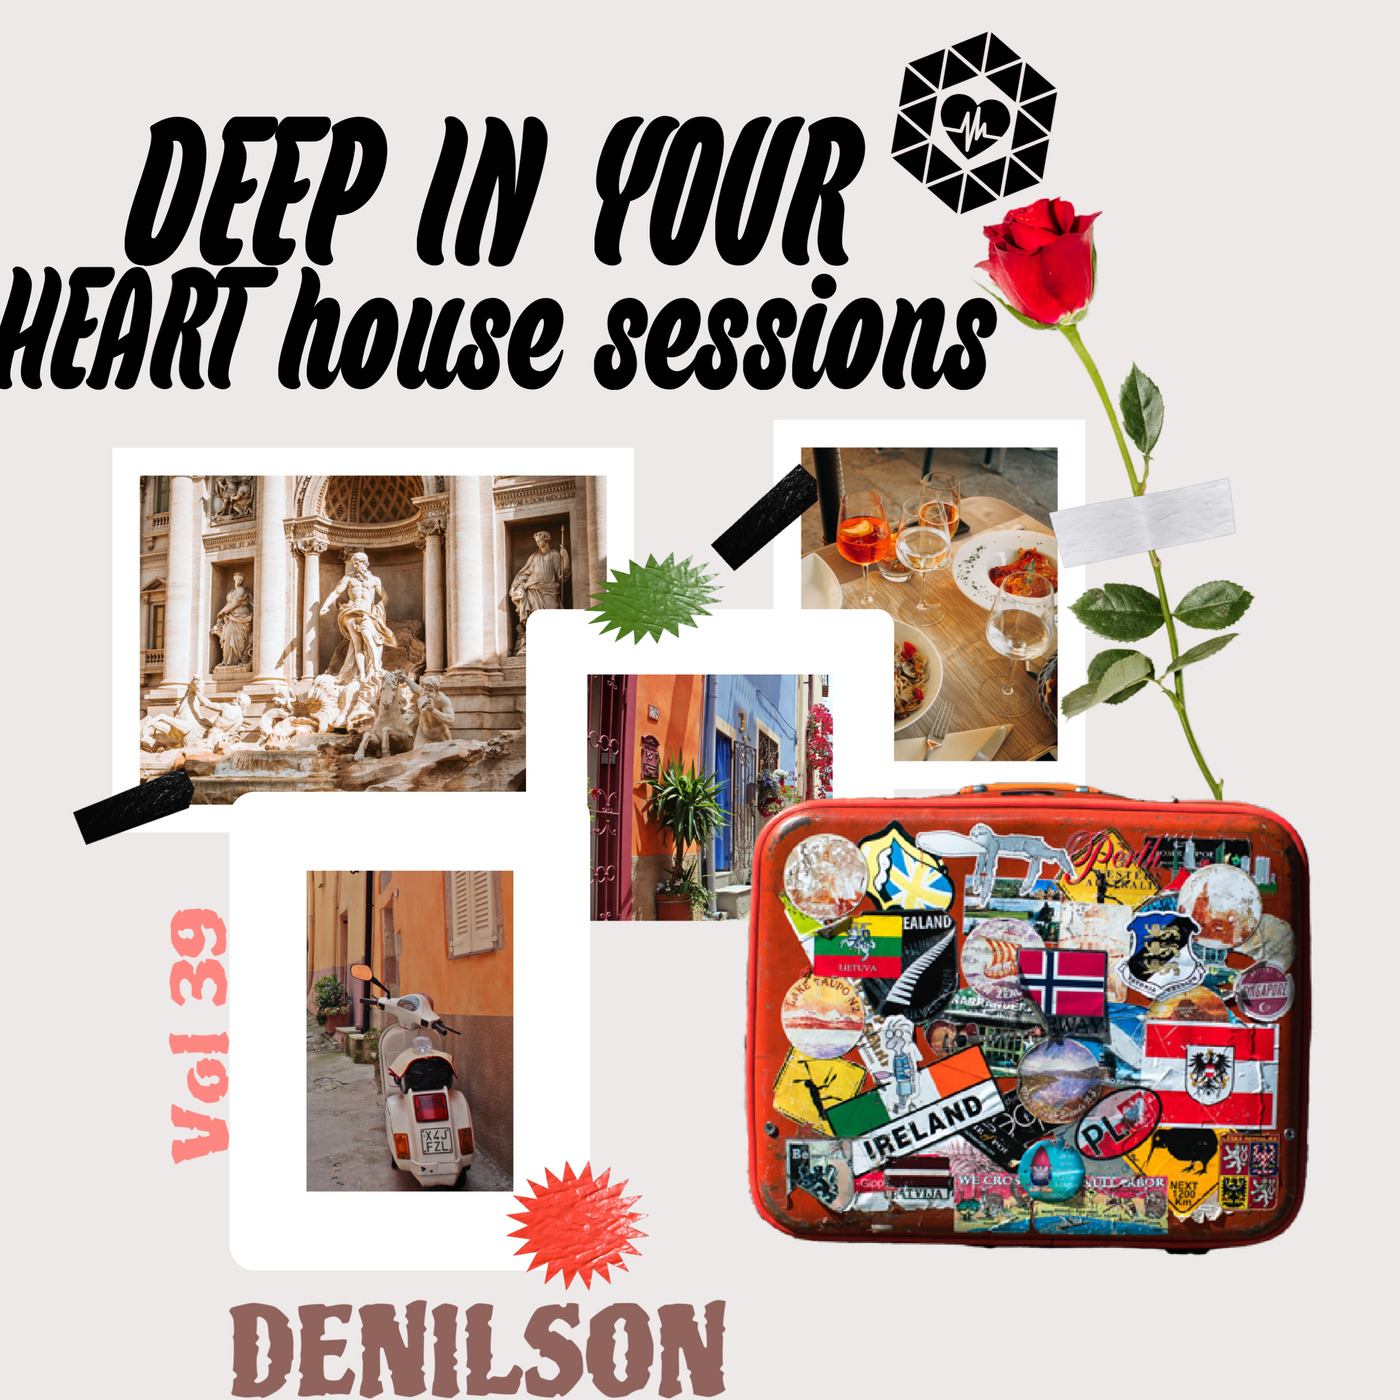 DEEP IN YOUR HEART house sessions vol 39 mixed byDenilson Mokoena